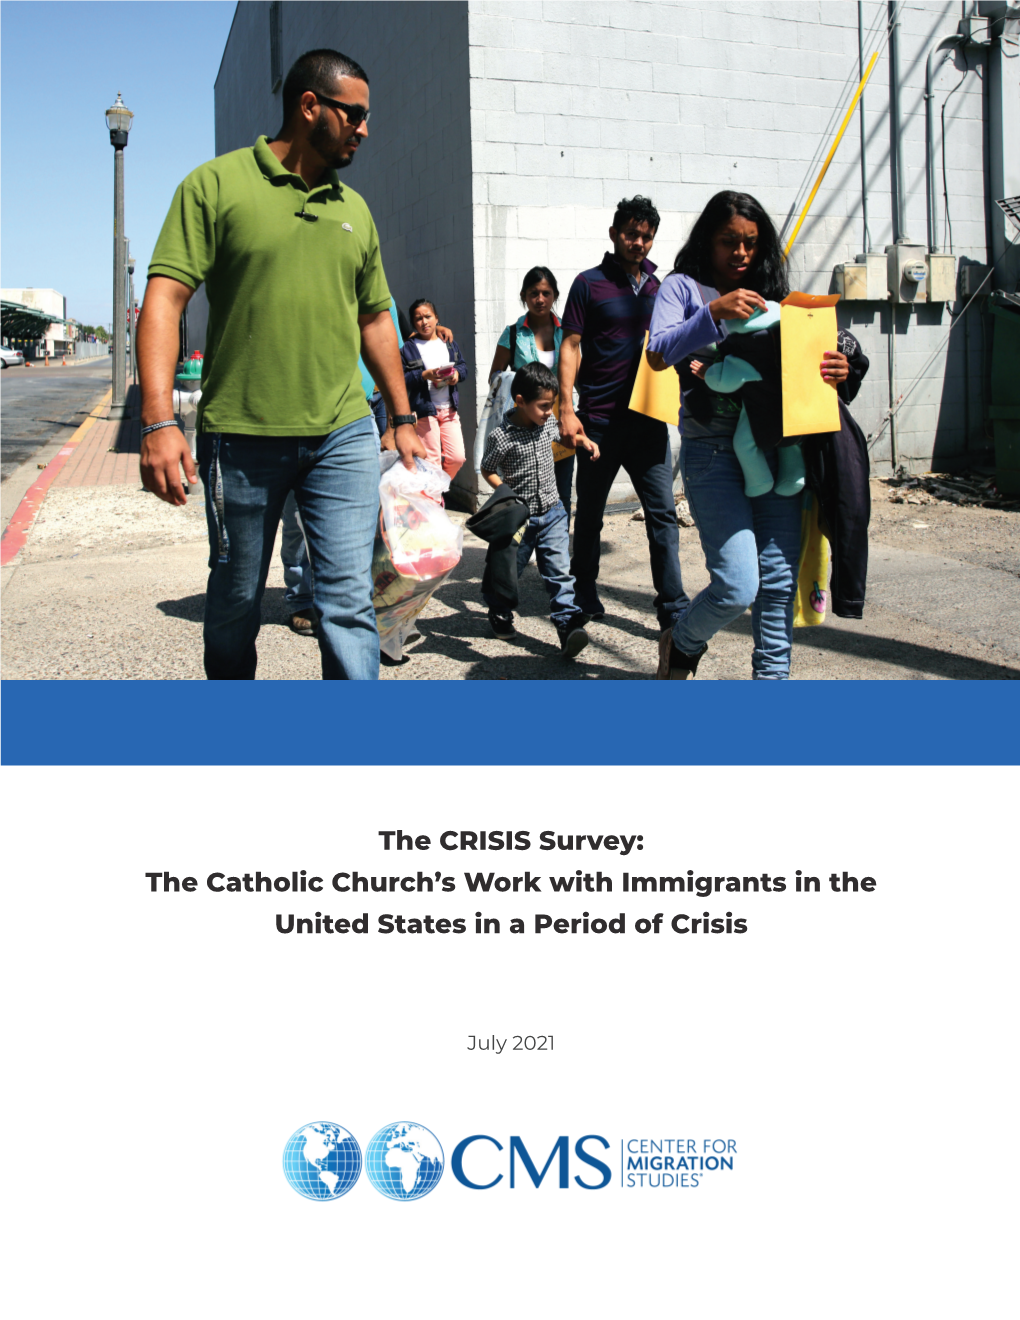 The CRISIS Survey: the Catholic Church's Work with Immigrants in the United States in a Period of Crisis